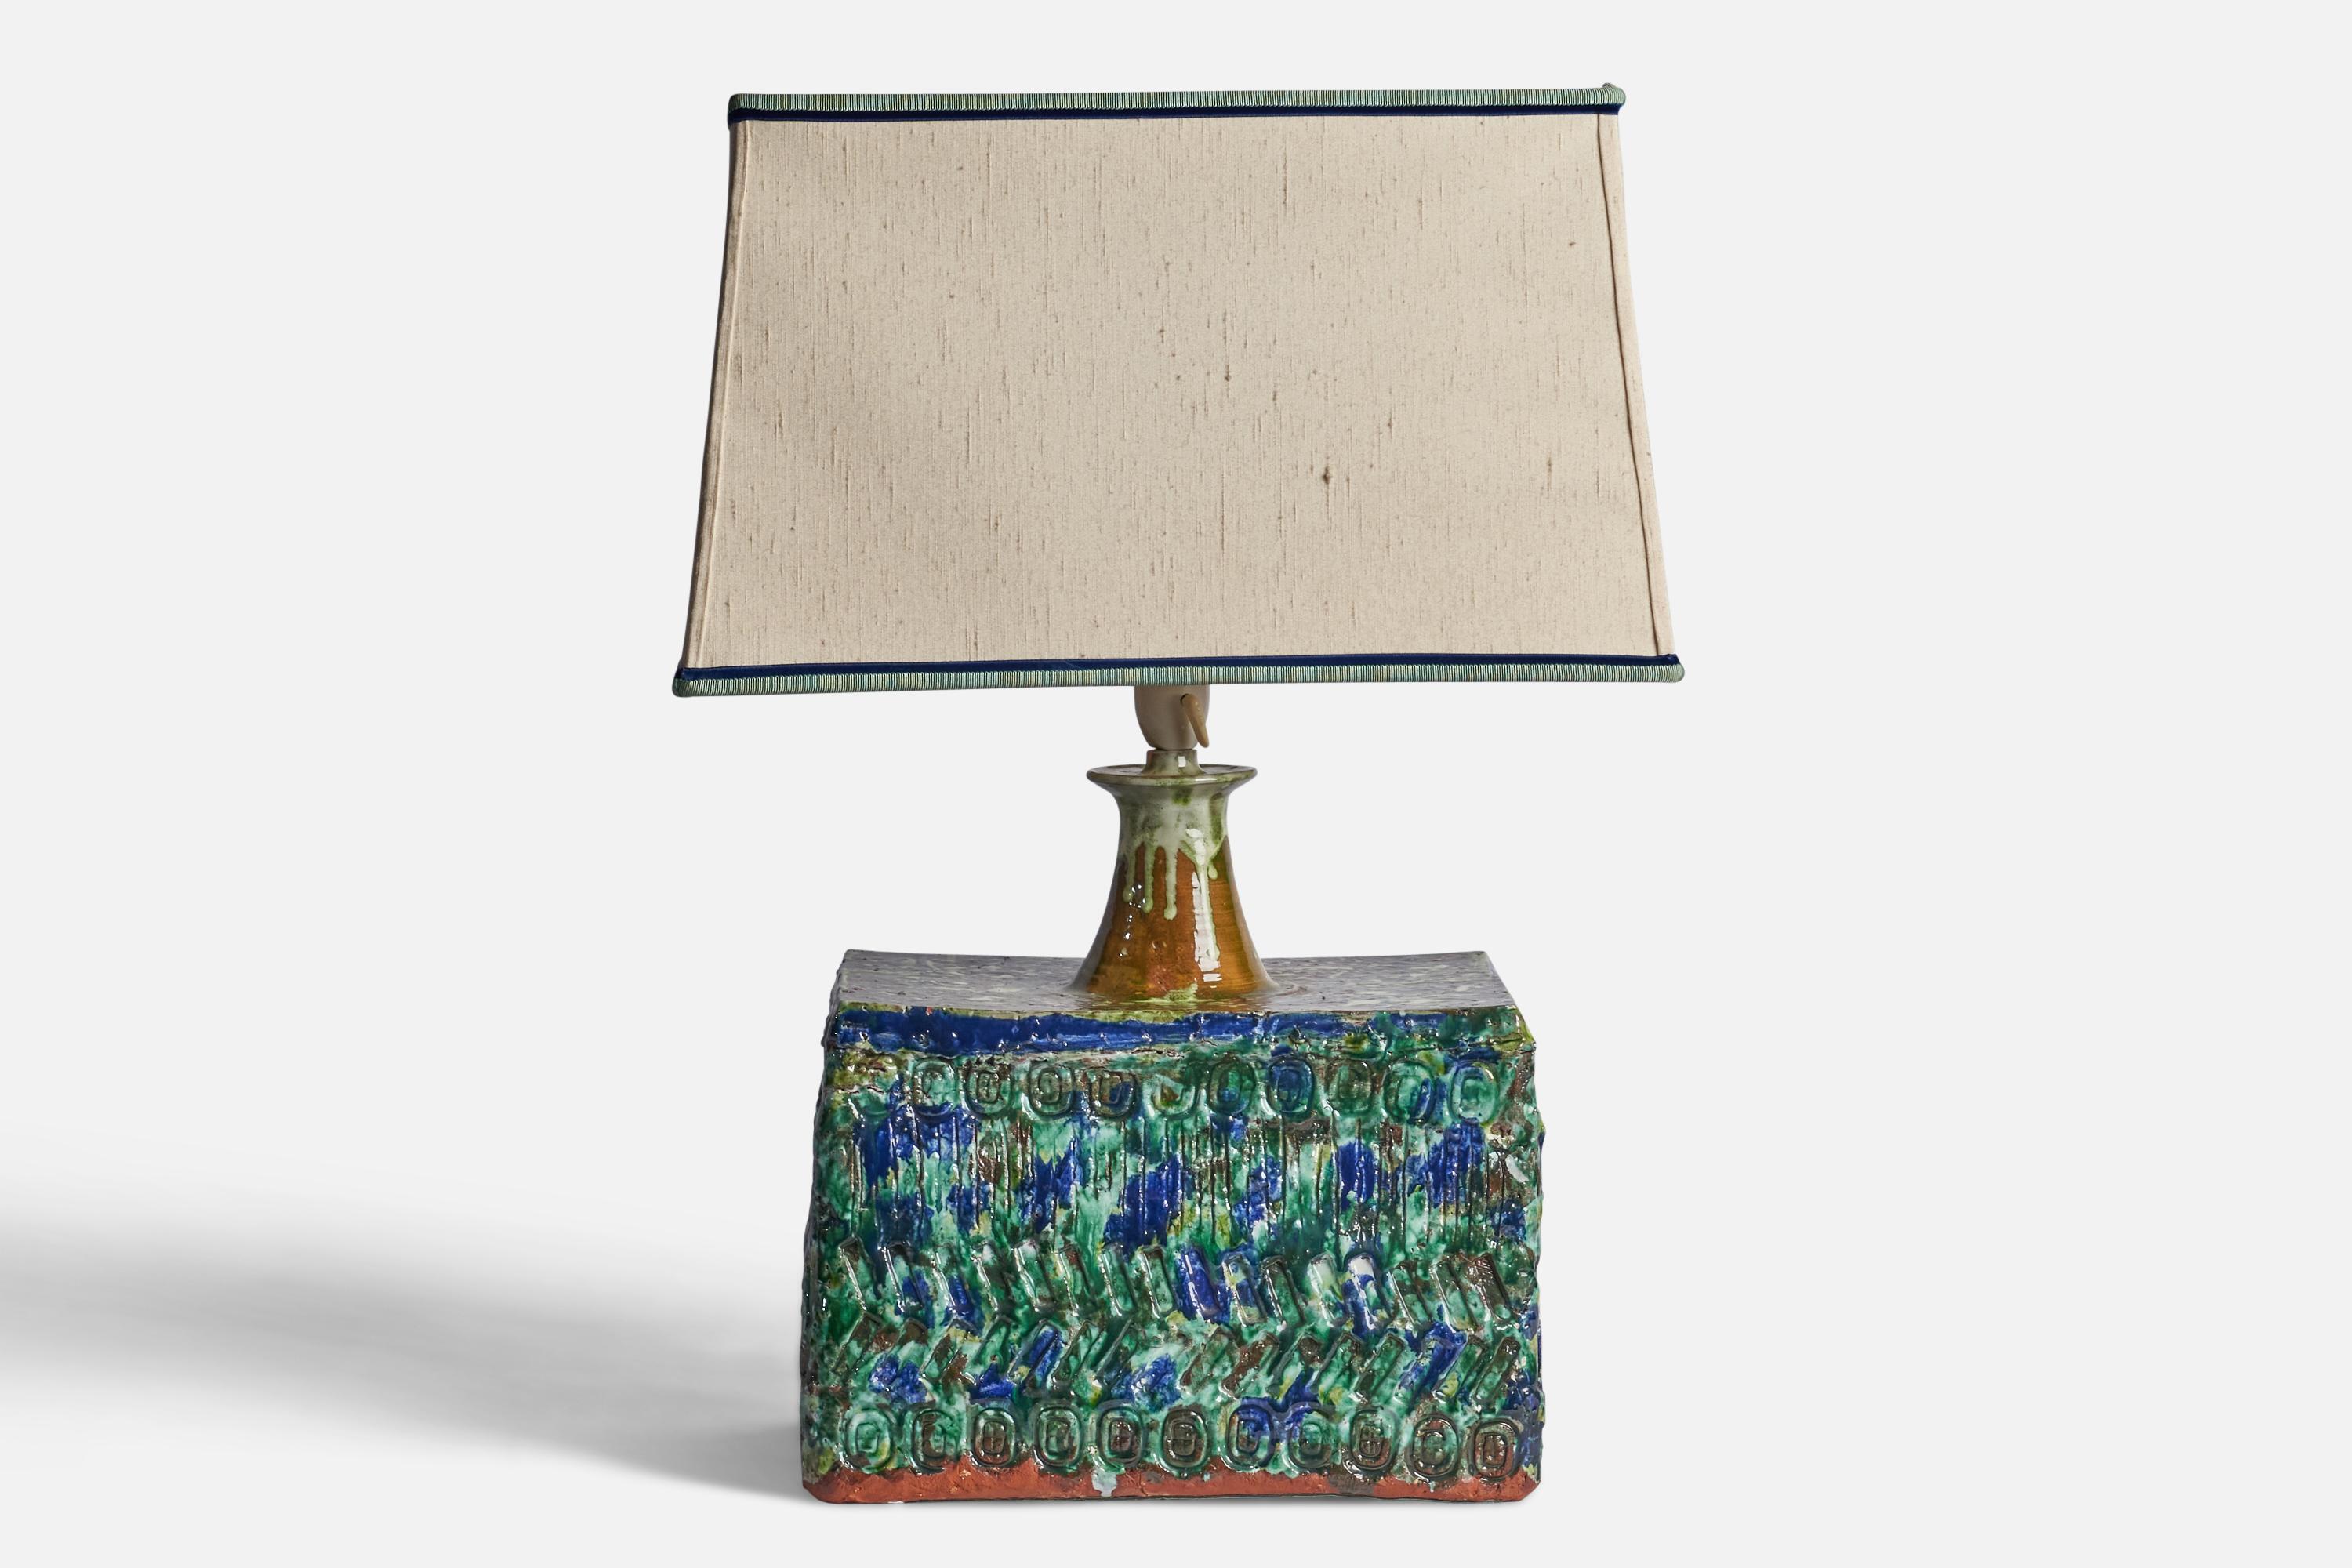 
A sizeable green and blue-glazed stoneware and fabric table lamp designed and produced by Palle Jensen, Denmark, c. 1960s.
Overall Dimensions (inches): 22.75 H x 12.75